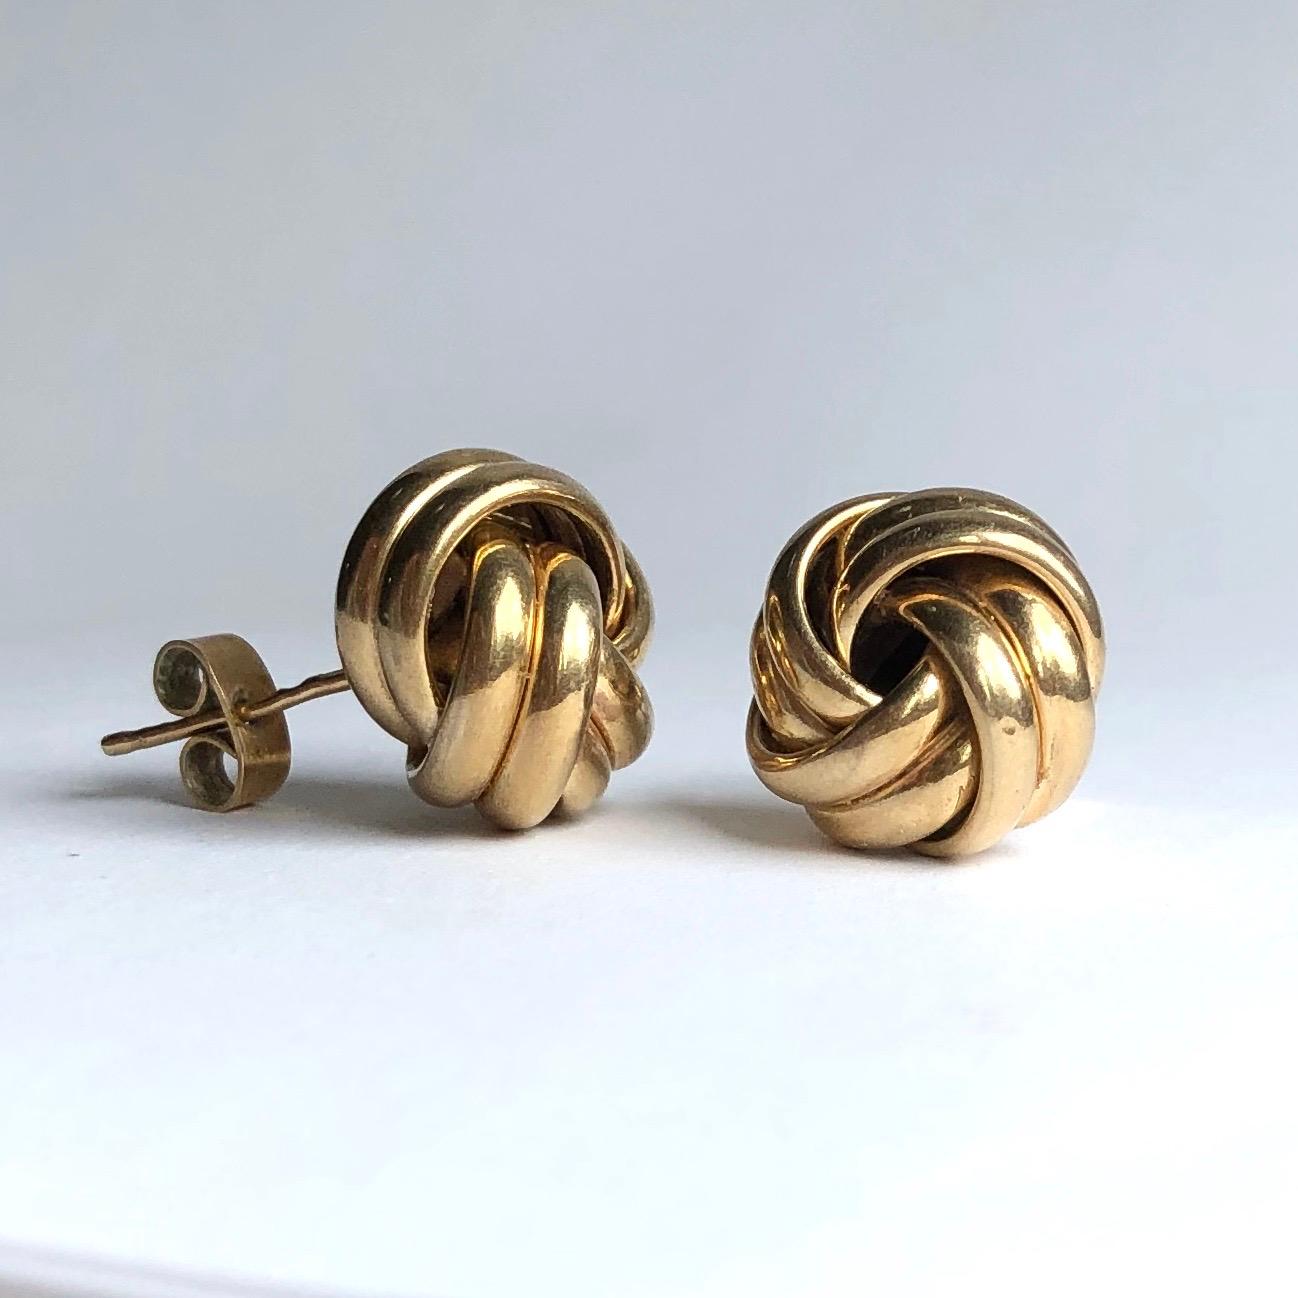 Glossy 9ct yellow gold superbly tied in a knot make the most stylish design for these earrings. The double layered knots have a wonderful sheen to them and make perfect over sized studs. 

Knot Diameter: 13mm
Height From Ear: 8mm

Weight: 2.76g